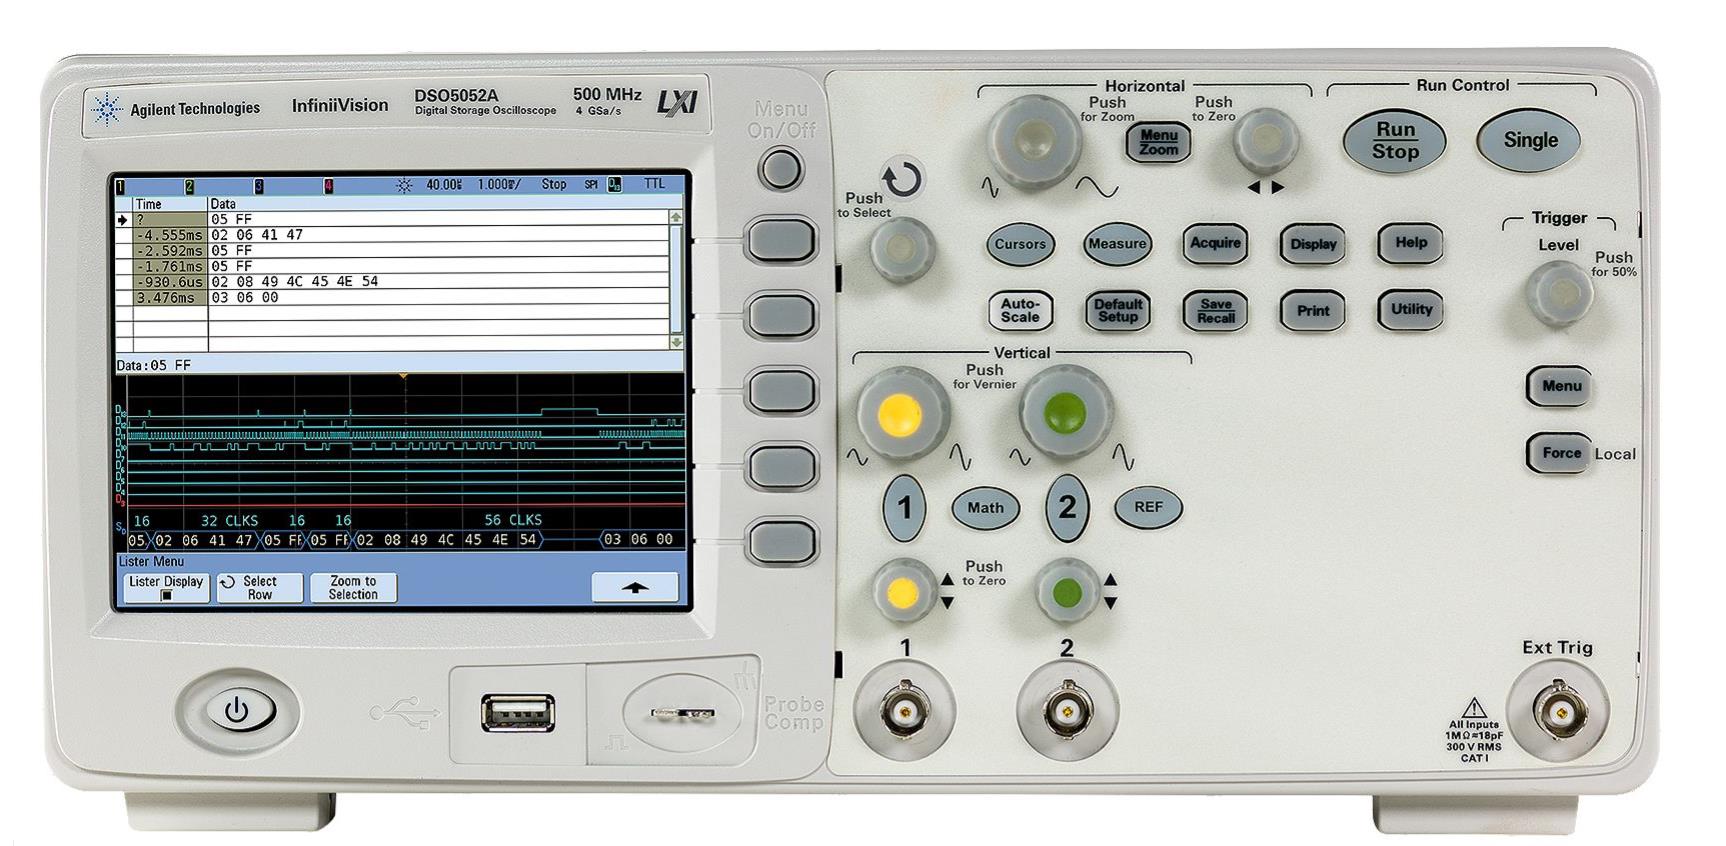 Similar product is HP / Agilent DSO5052A